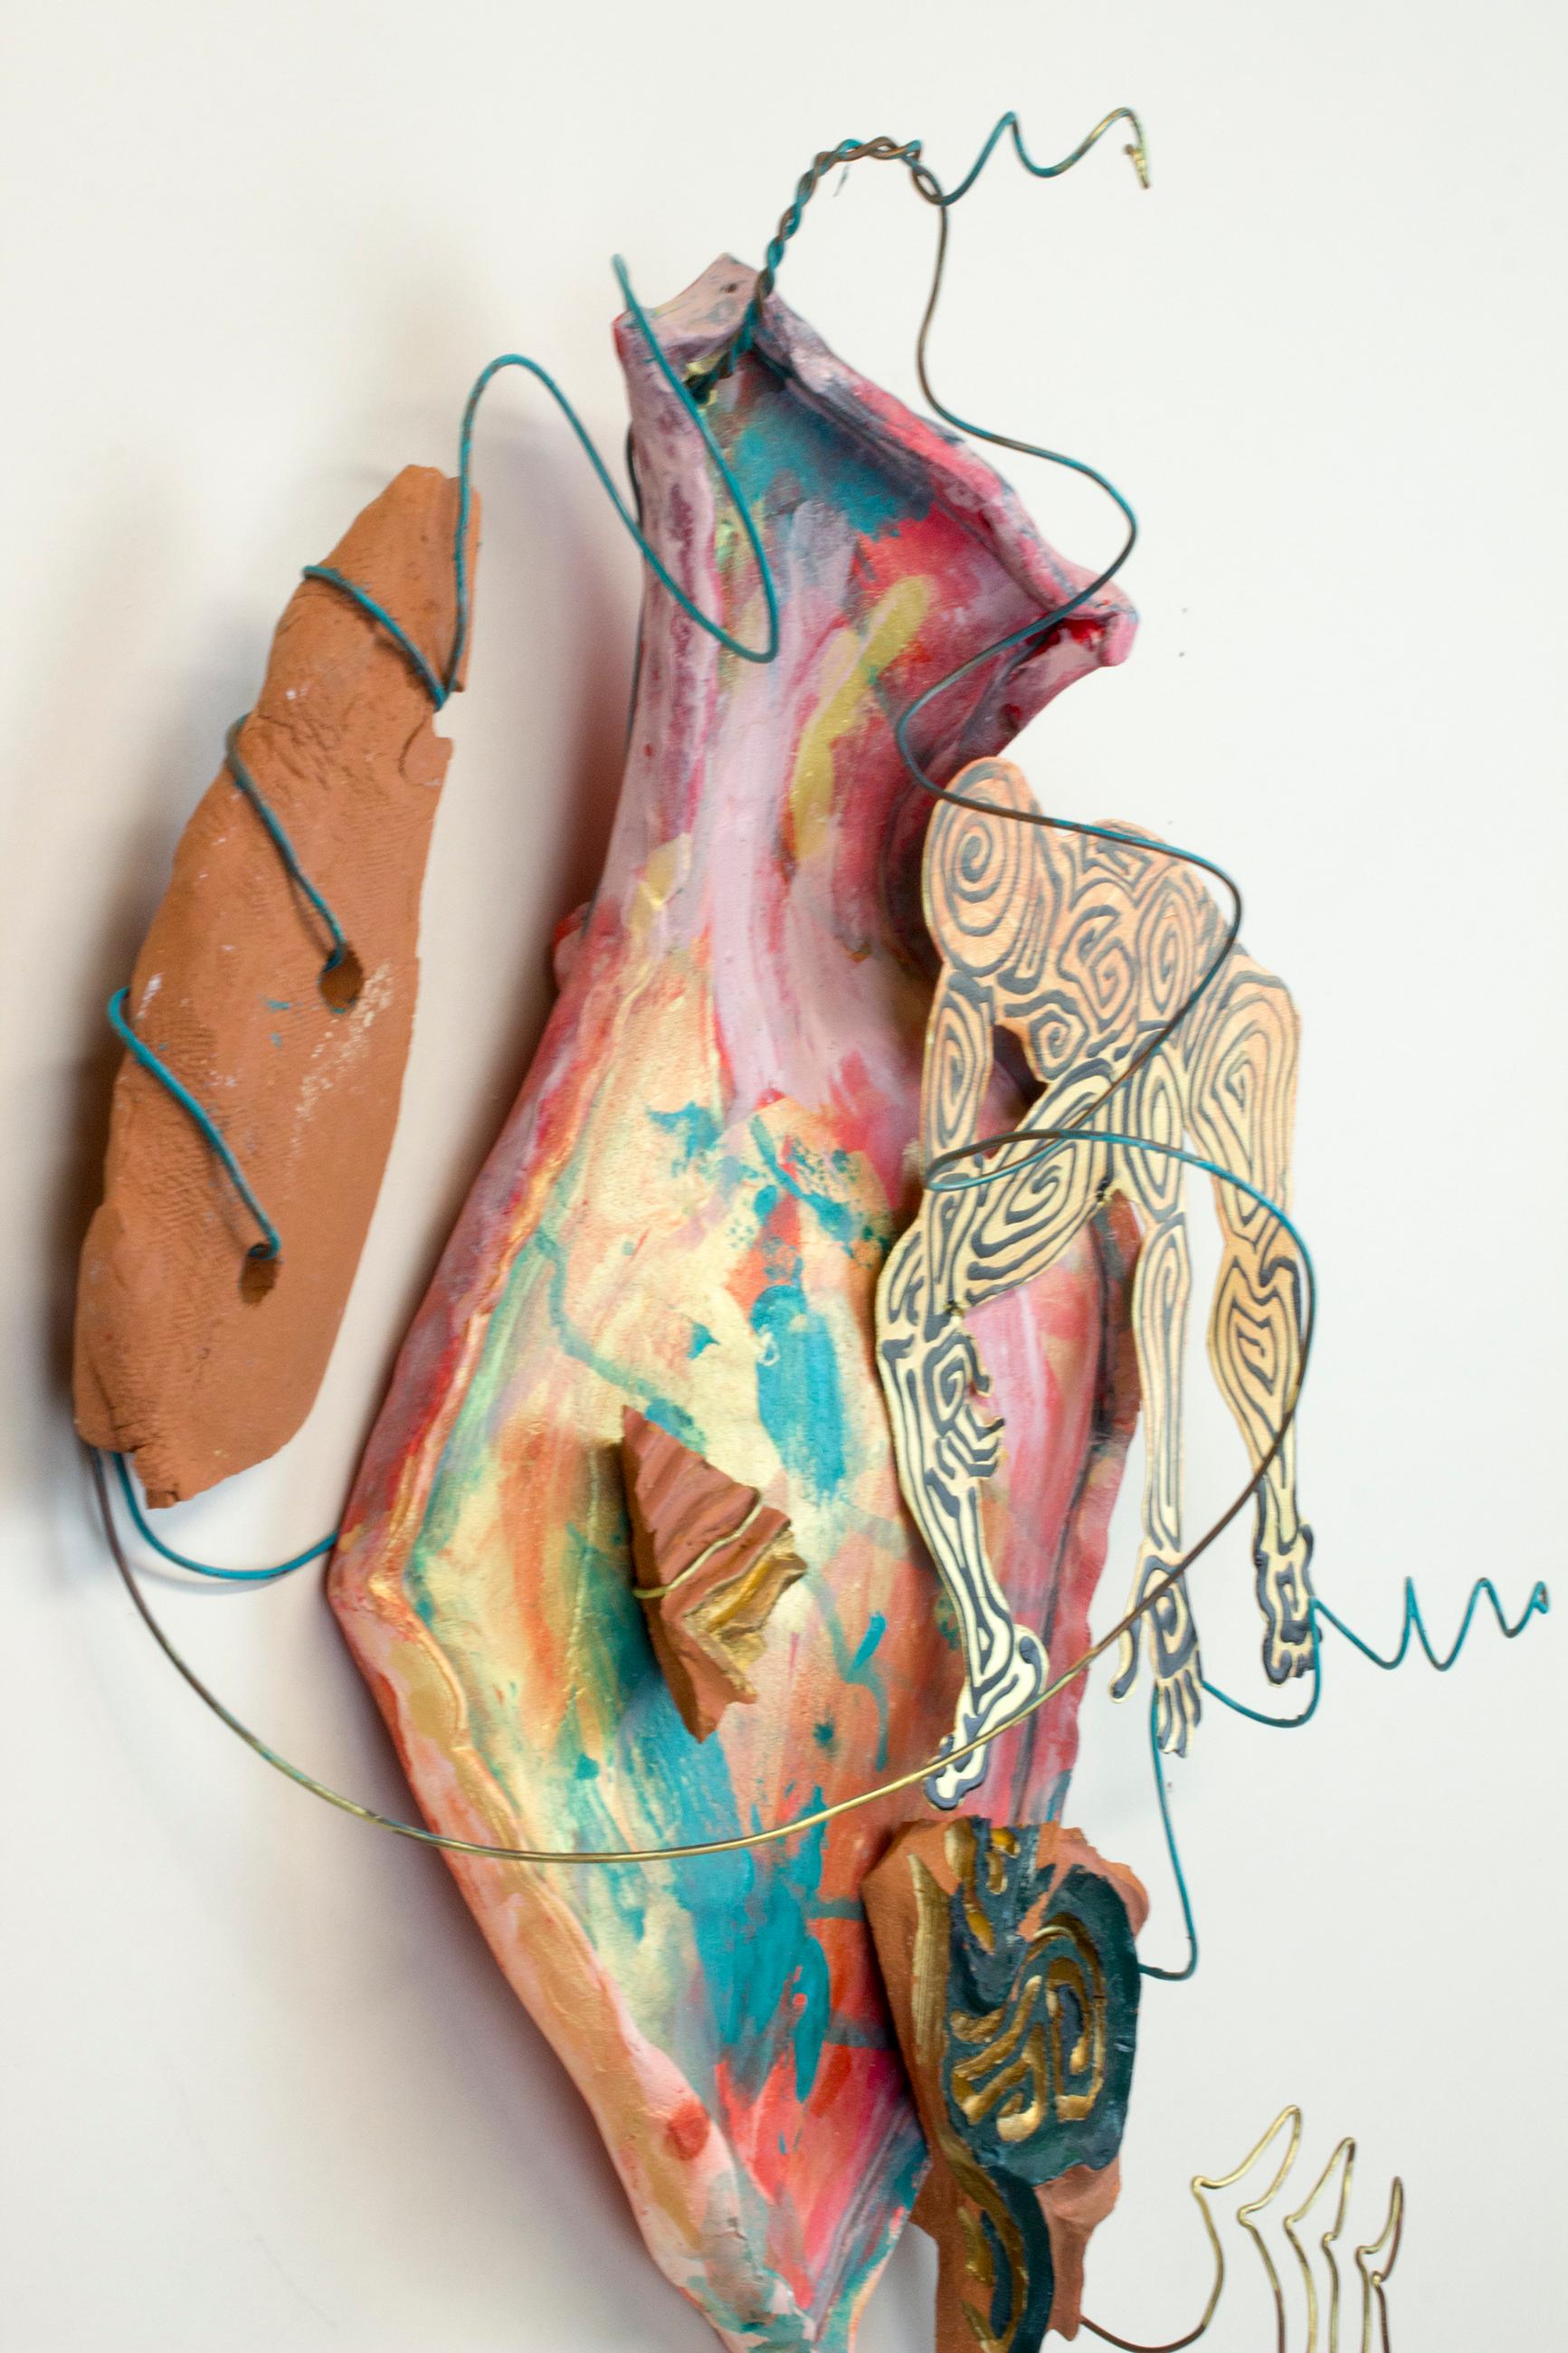 Virginia Mahoney’s “Illogical Sequence” is an 18 x 14 x 7 inch ceramic and metal wall sculpture in peach, teal, pink, gold, green, and brown. A cutout metal figure painted in gold and black reaches for a ceramic shard on a painted ceramic